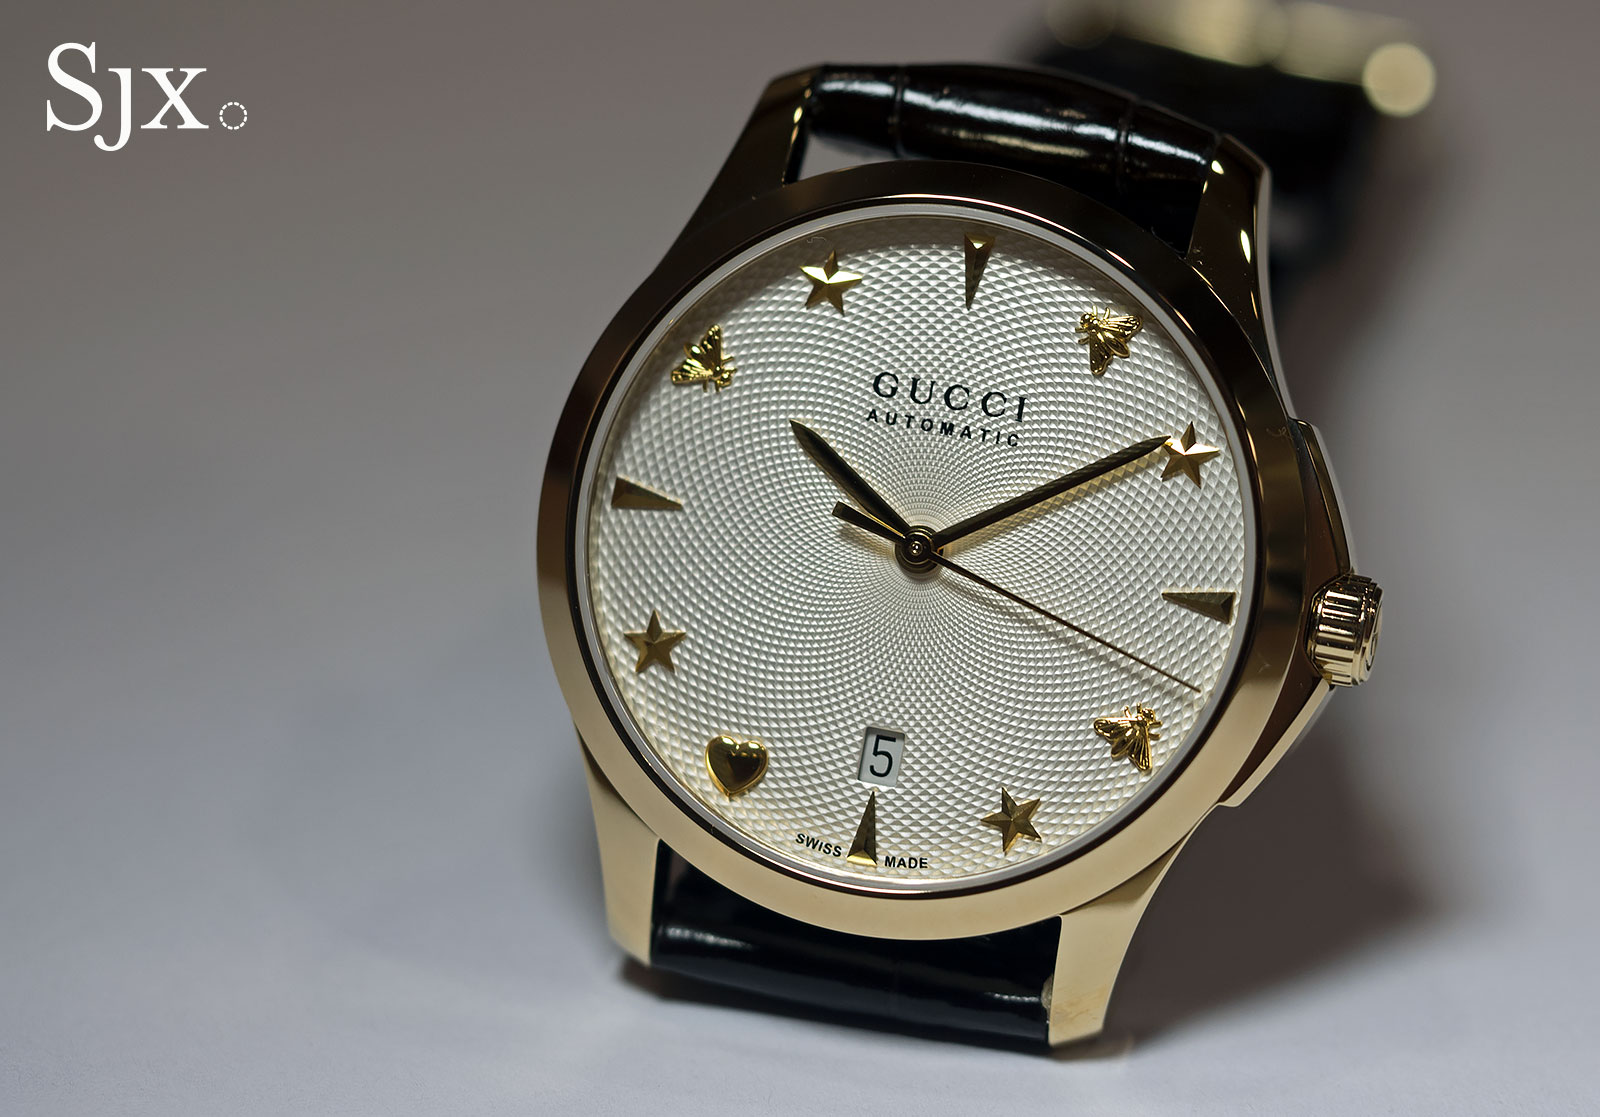 gucci g timeless automatic